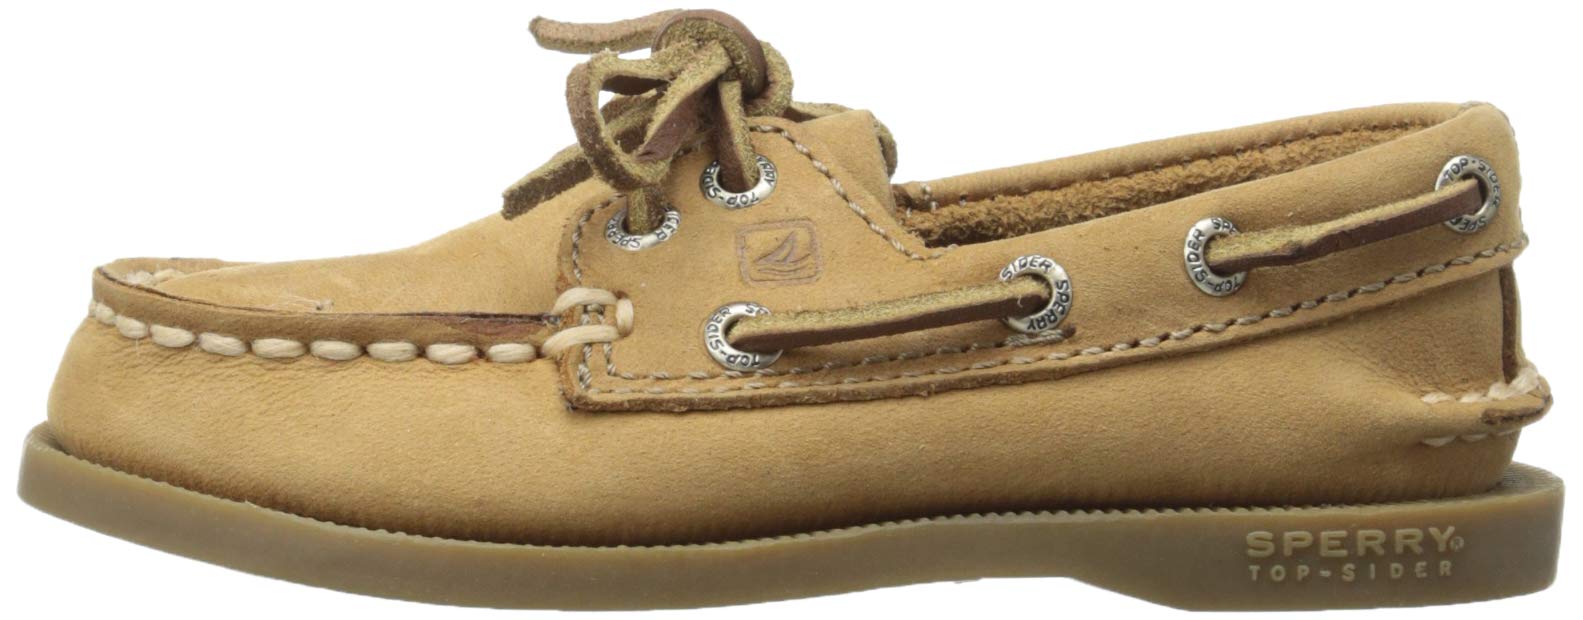 Sperry Kid's^Kid's Authentic Original Boat Shoe, 7 Youth